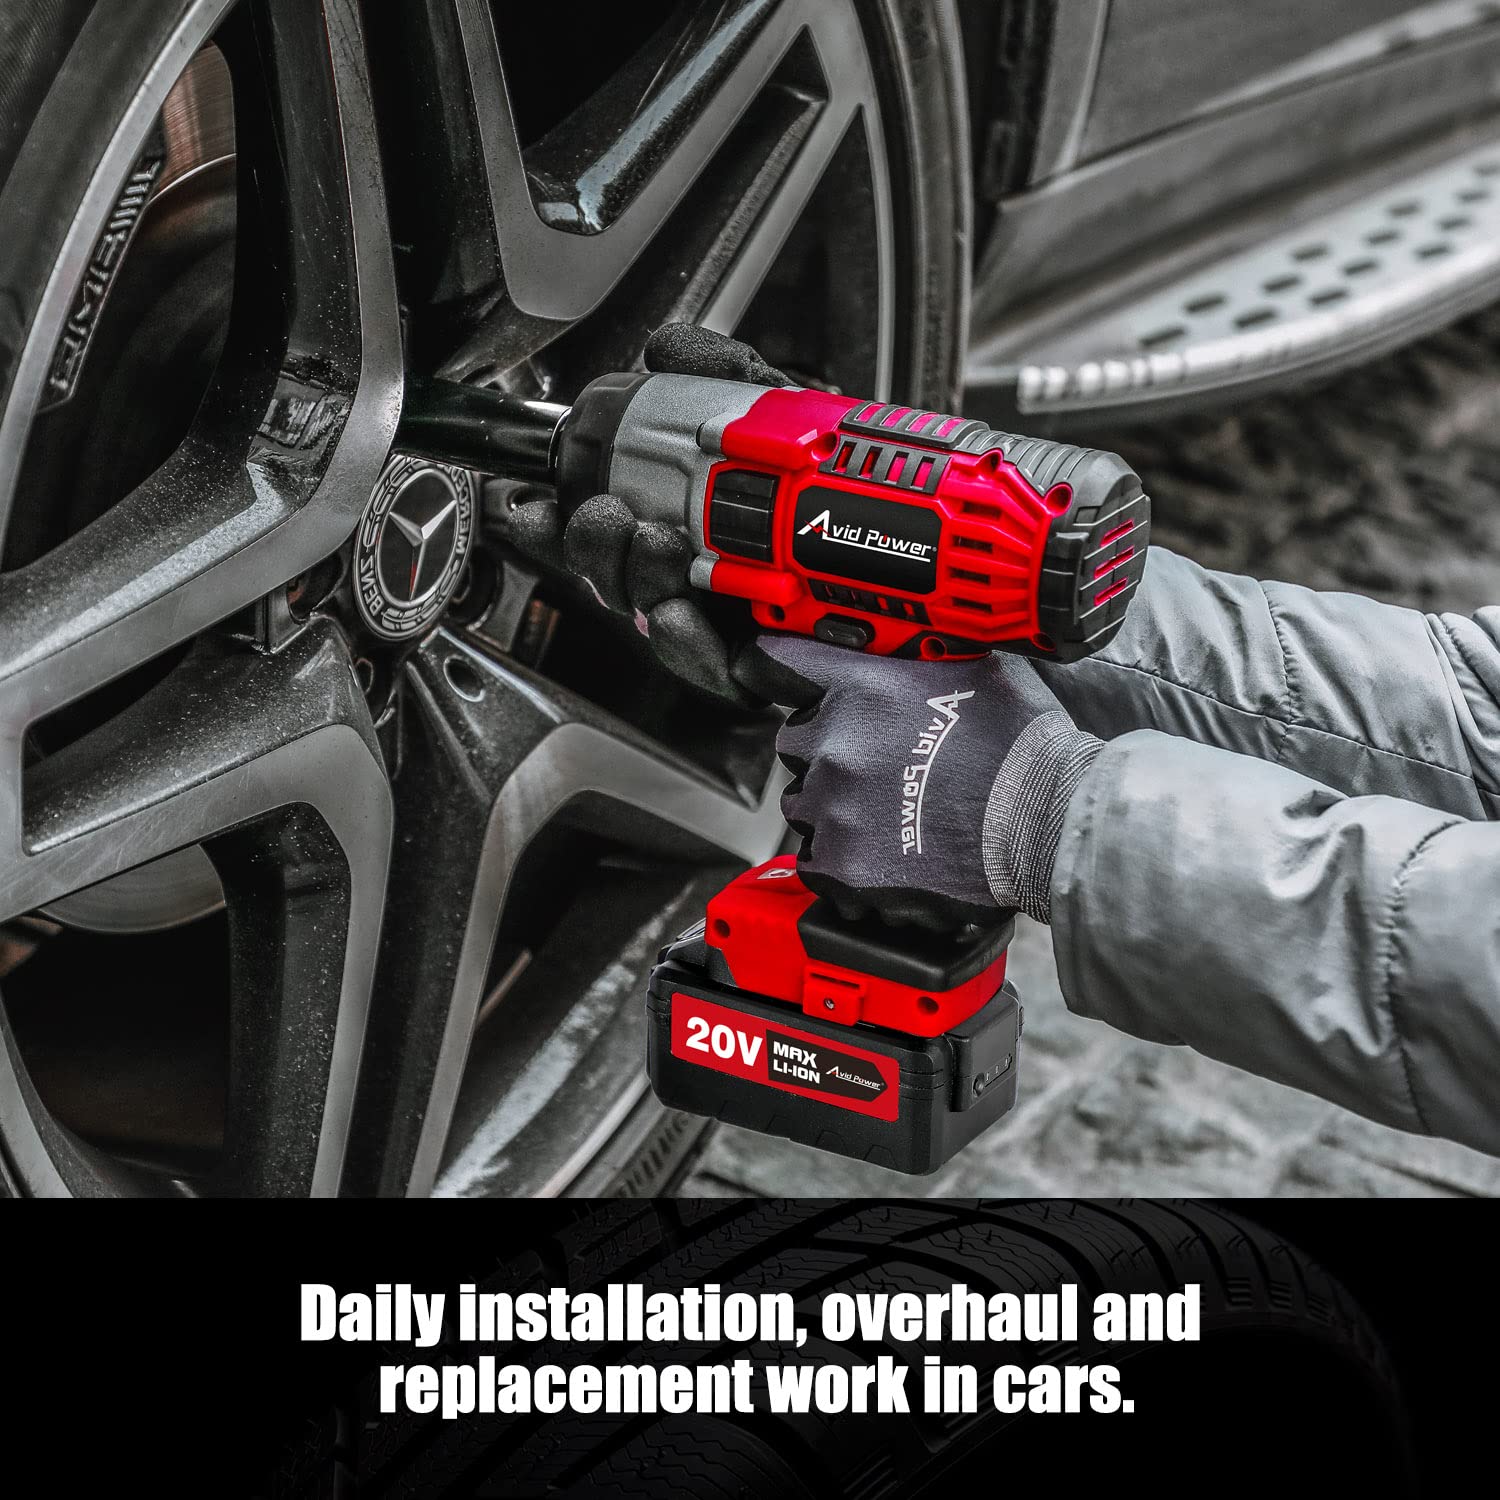 AVID POWER Cordless Impact Wrench Bundle with Tire Inflator Air Compressor